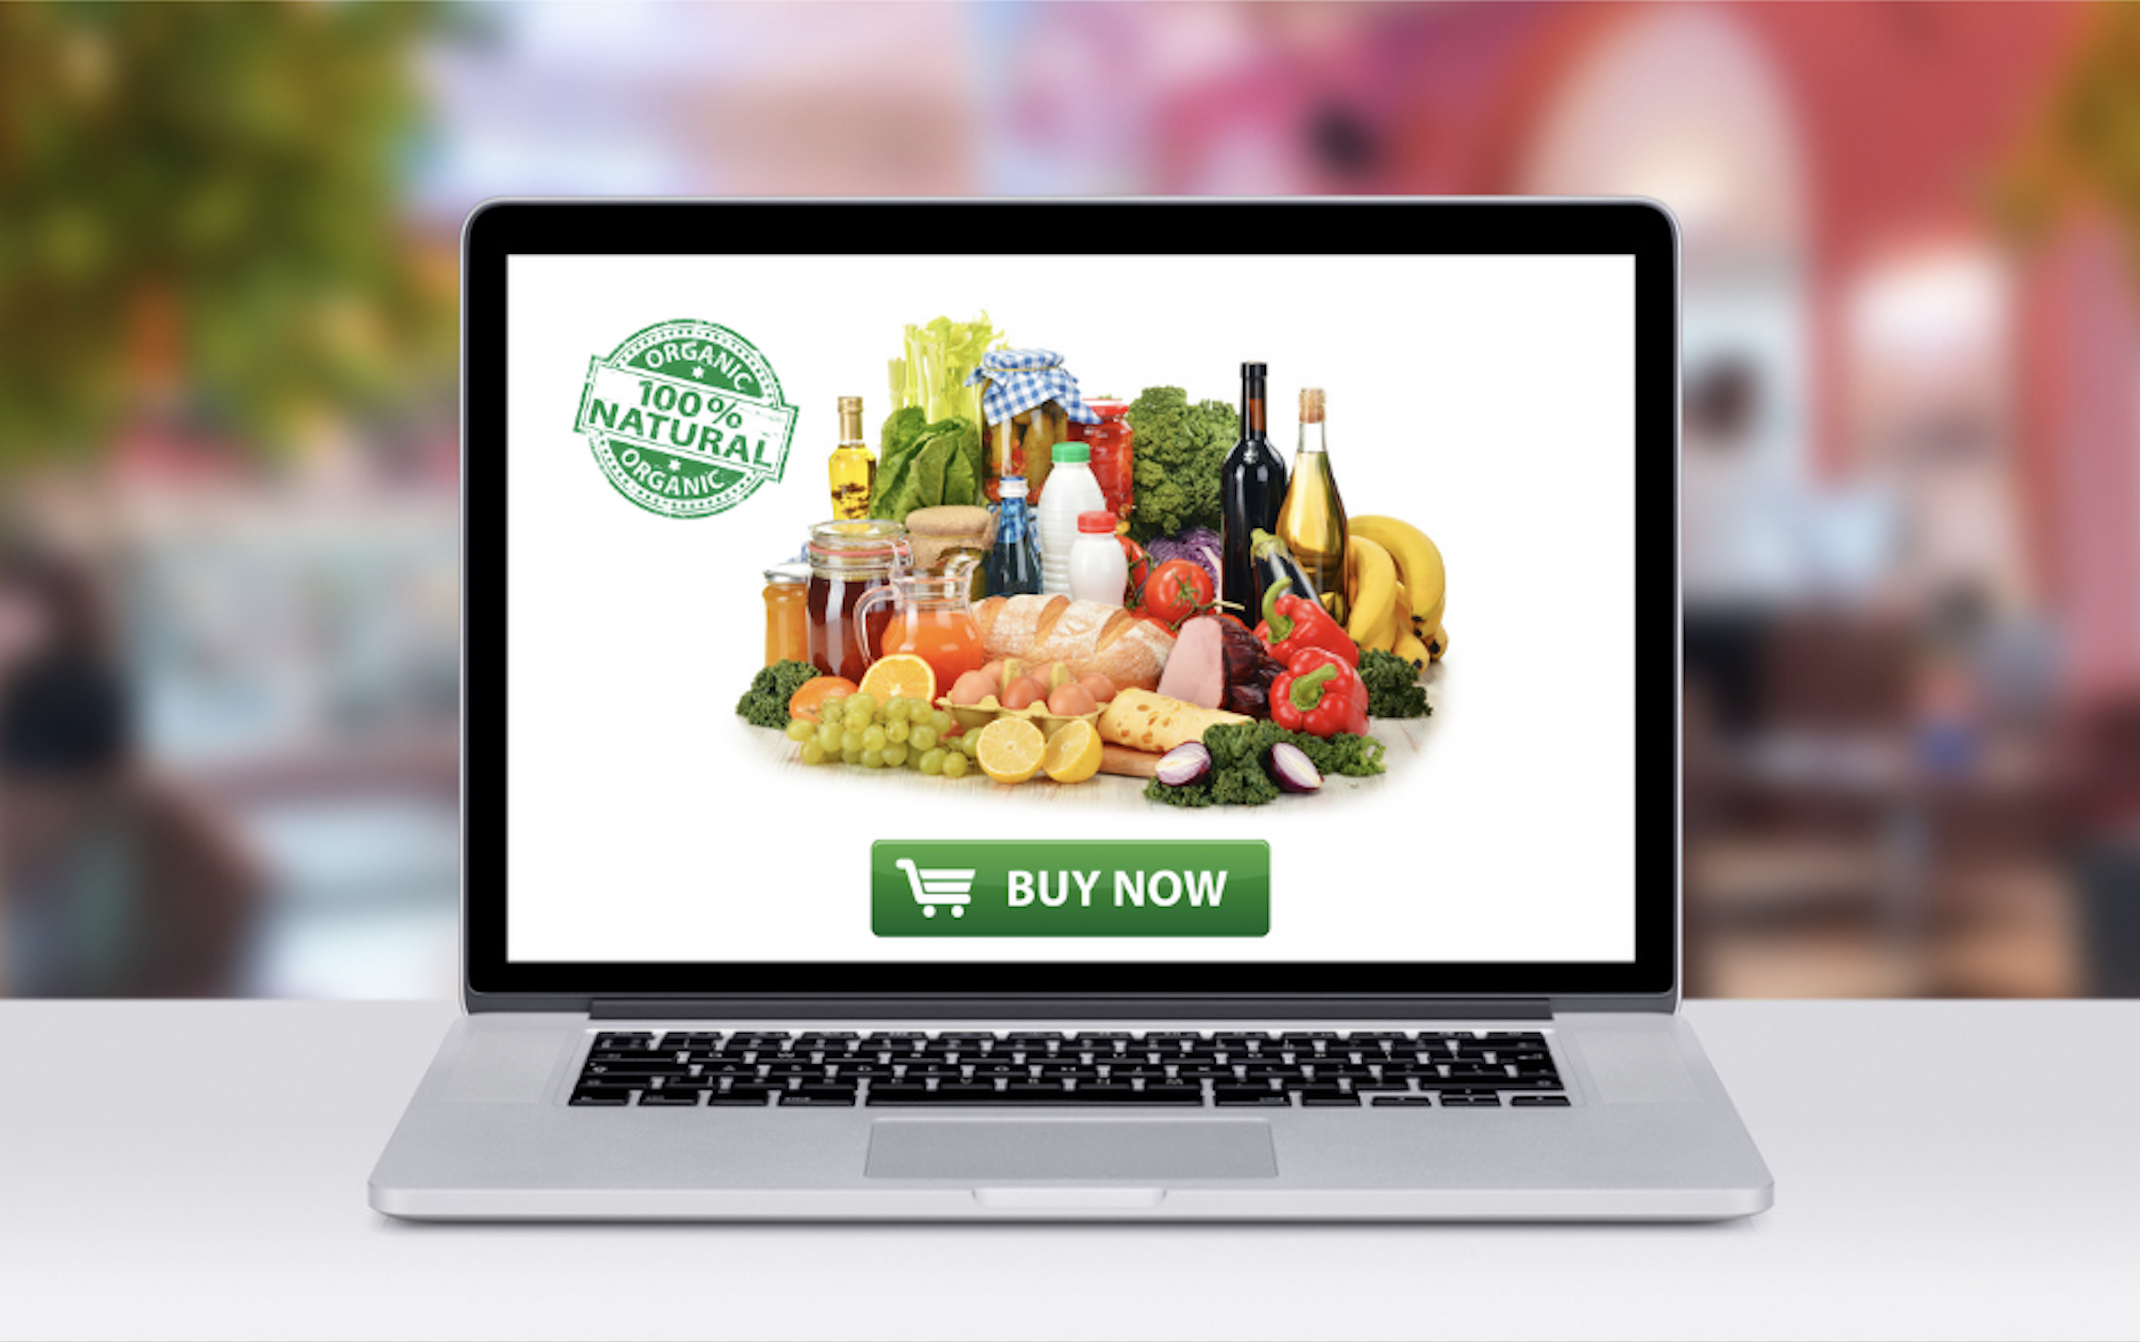 Asian Staples Is More Than an Online Grocer, Supplying Recipes and